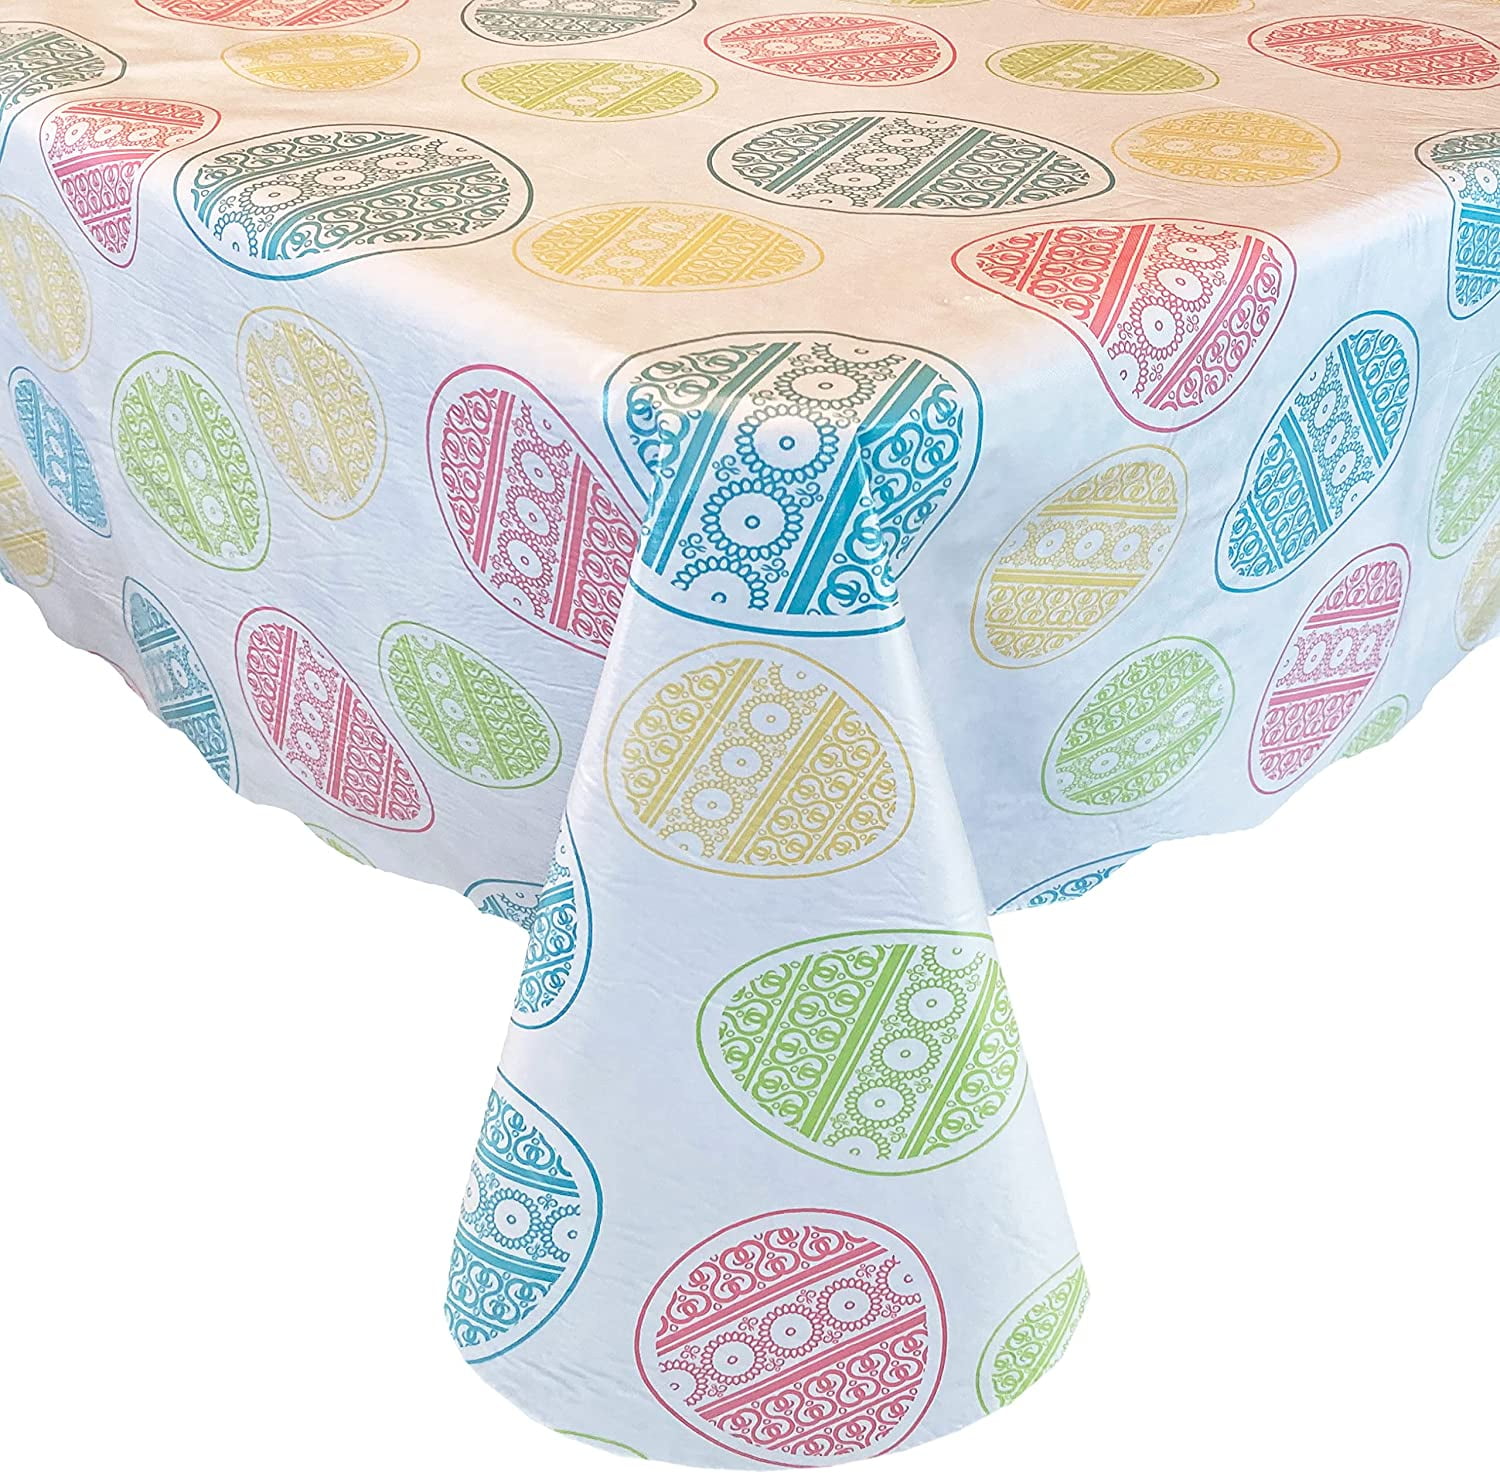 Whimsy Circle Contemporary Print Indoor/Outdoor Vinyl Flannel Backed Tablecloth Cooltone 60 x 84 Oval 